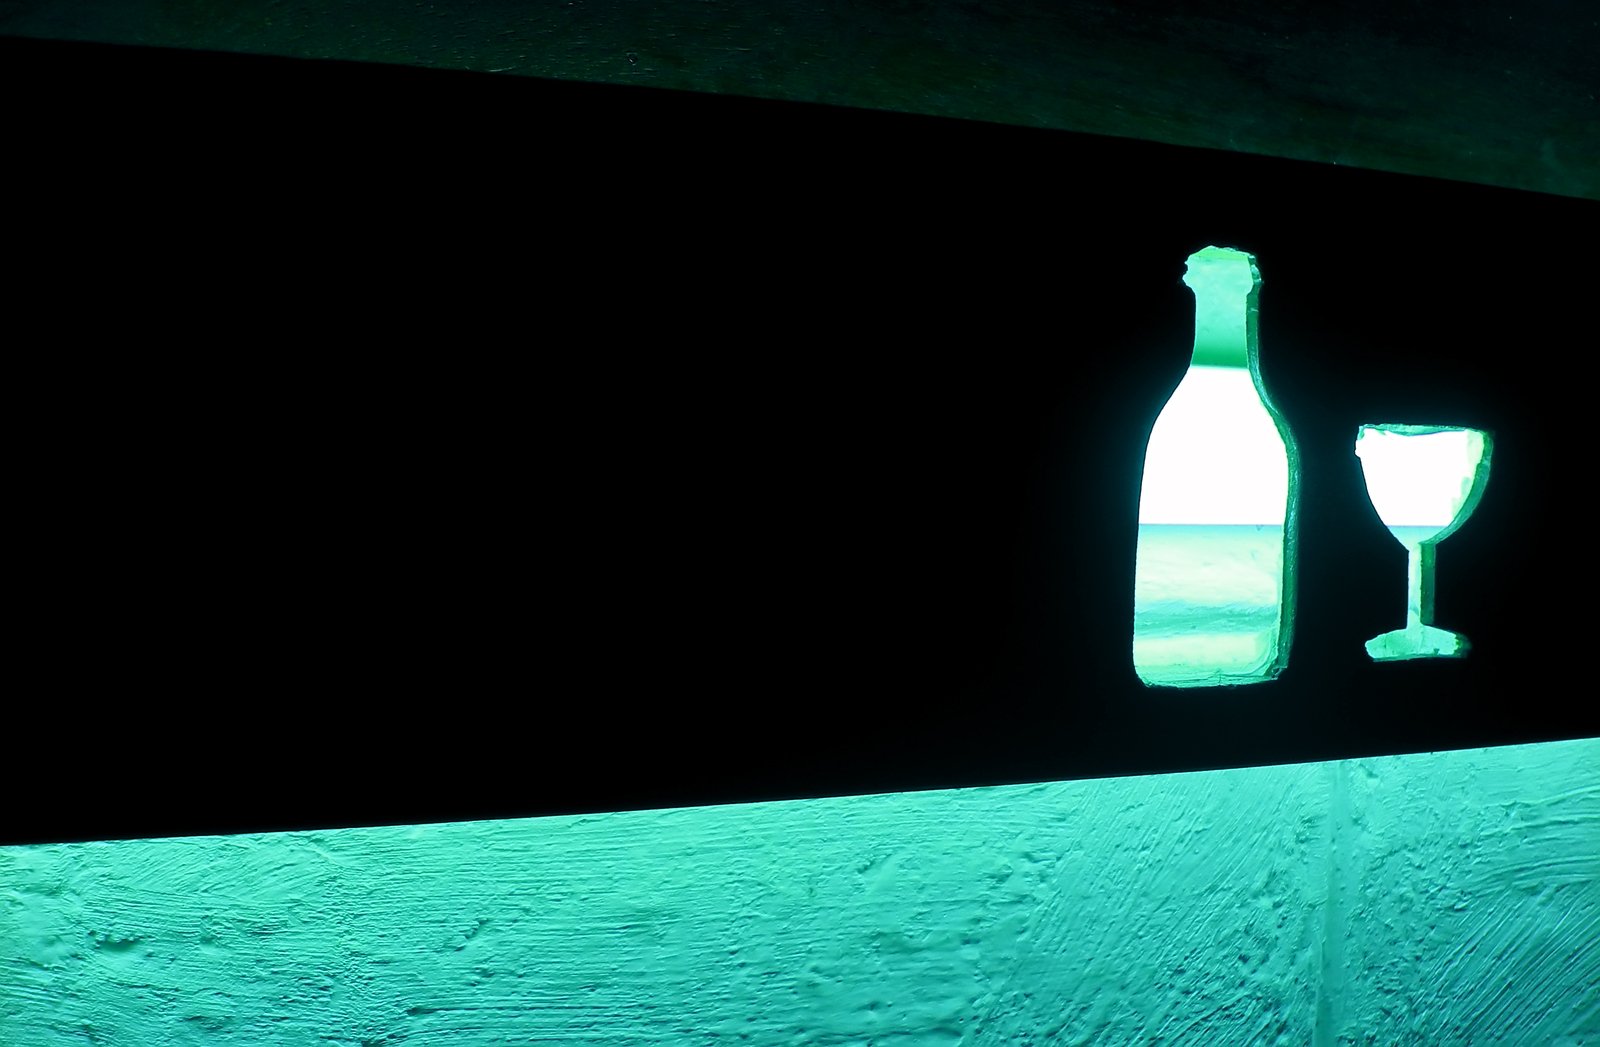 a bottle and glass are sitting on a surface